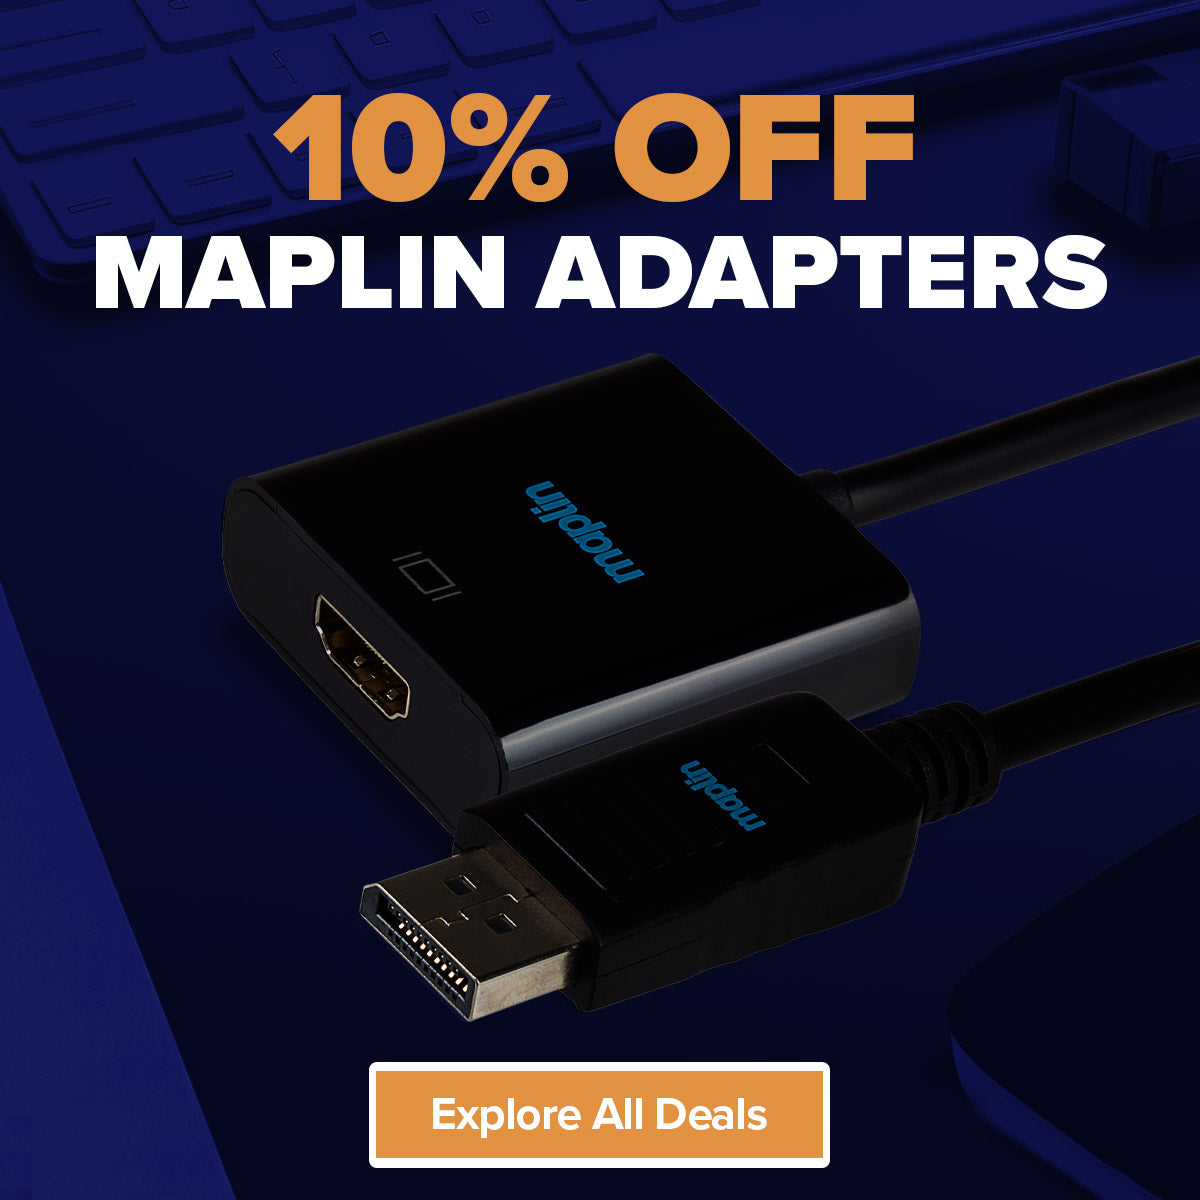 Save 10% off Maplin Adapters with our January Sale deals!